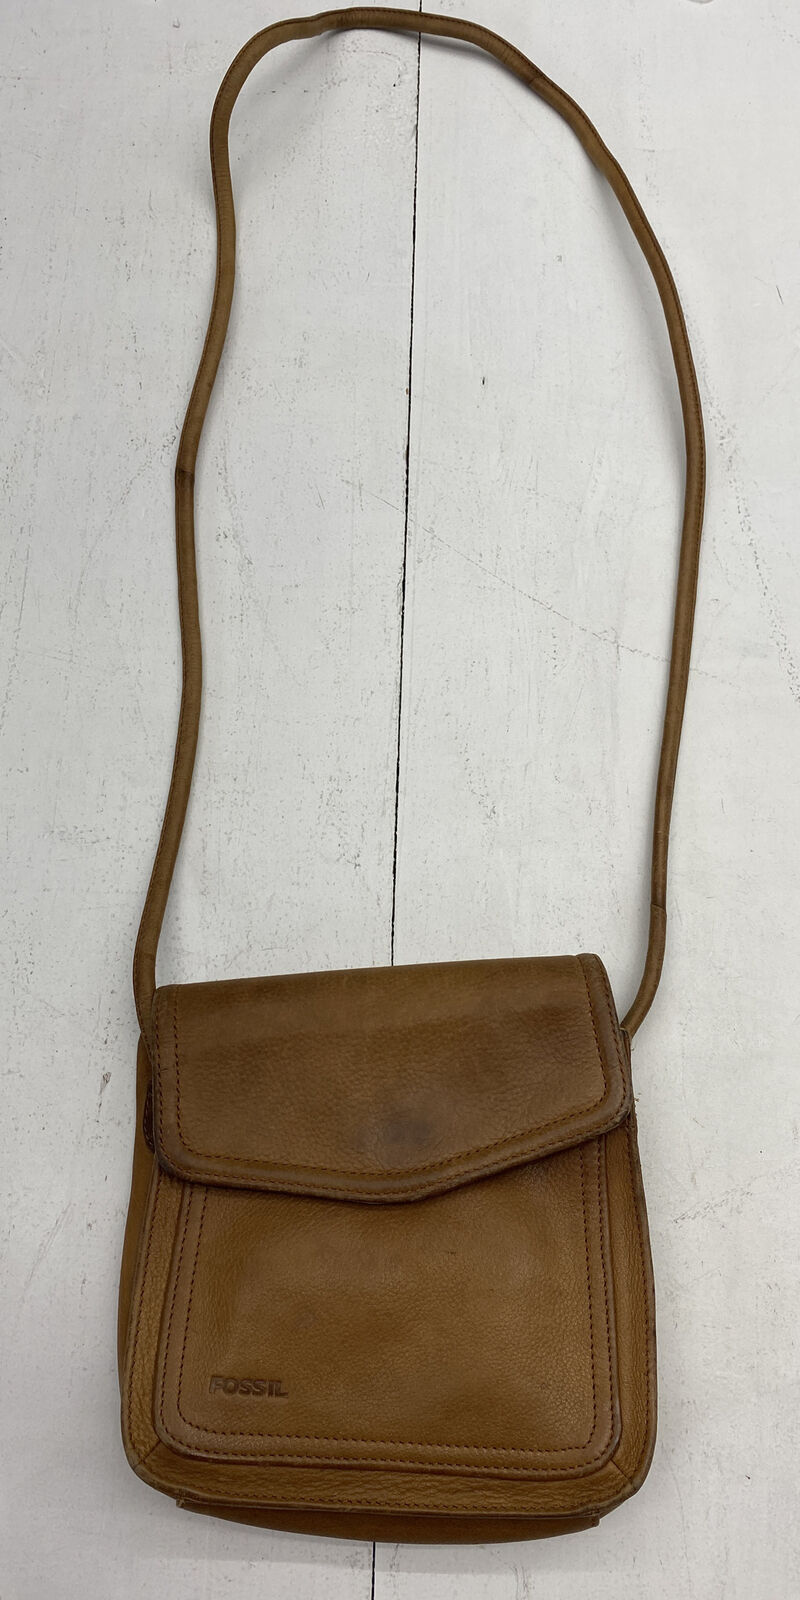 Vintage Fossil Brown Leather Crossbody Satchel Purse